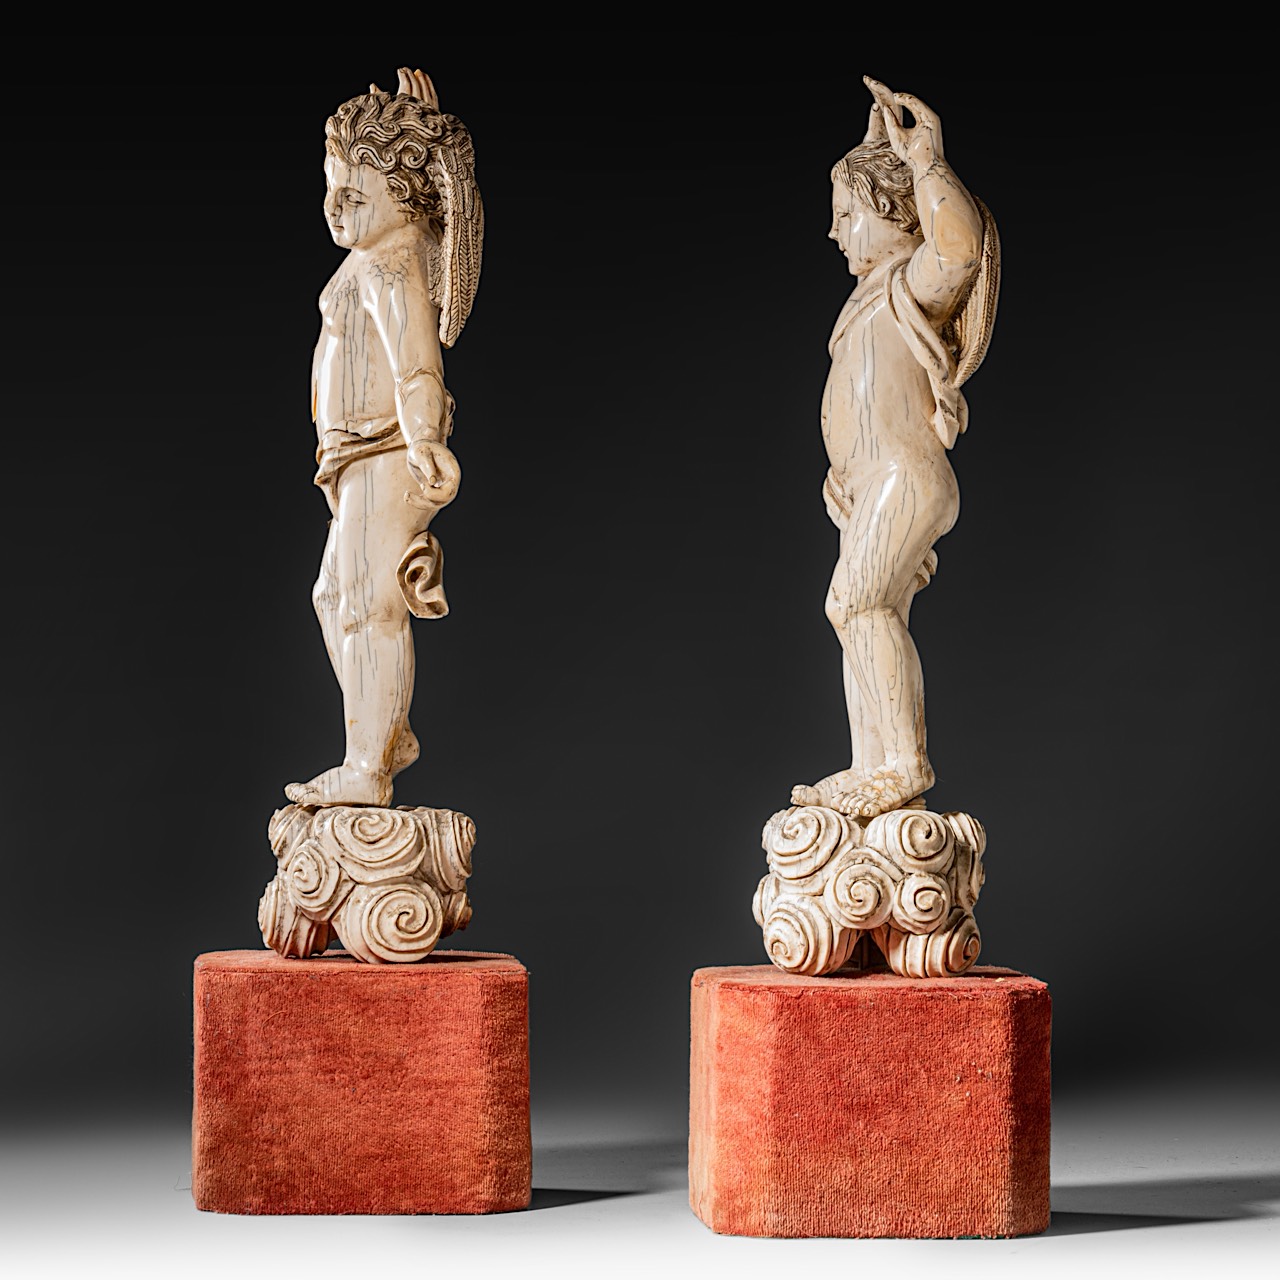 A pair of 17thC ivory angels, probably Indo-Portuguese, H (figures) 38,5 cm - total H 49 cm / 2862 - - Image 3 of 7